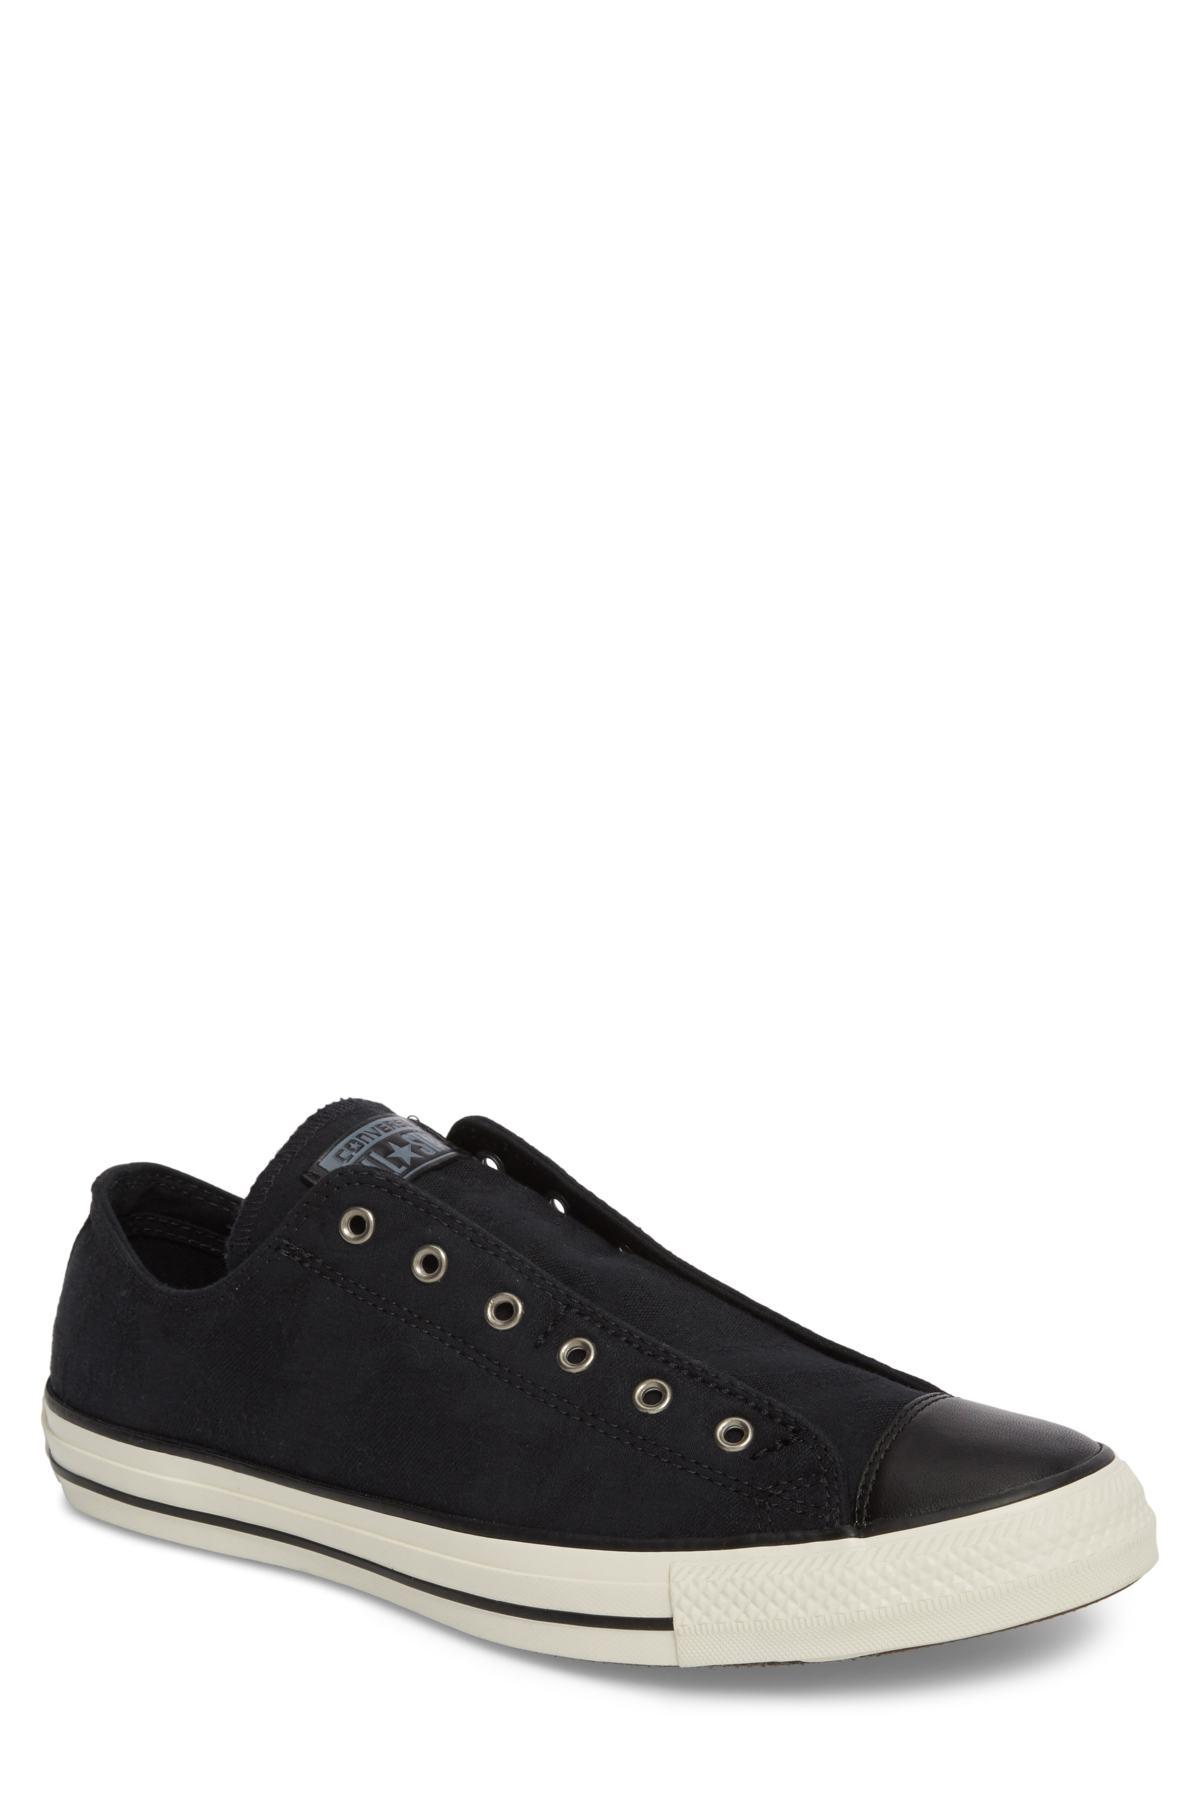 Converse Chuck Taylor(r) All Star(r) Laceless Low Top Sneaker (unisex) in  Black for Men - Lyst